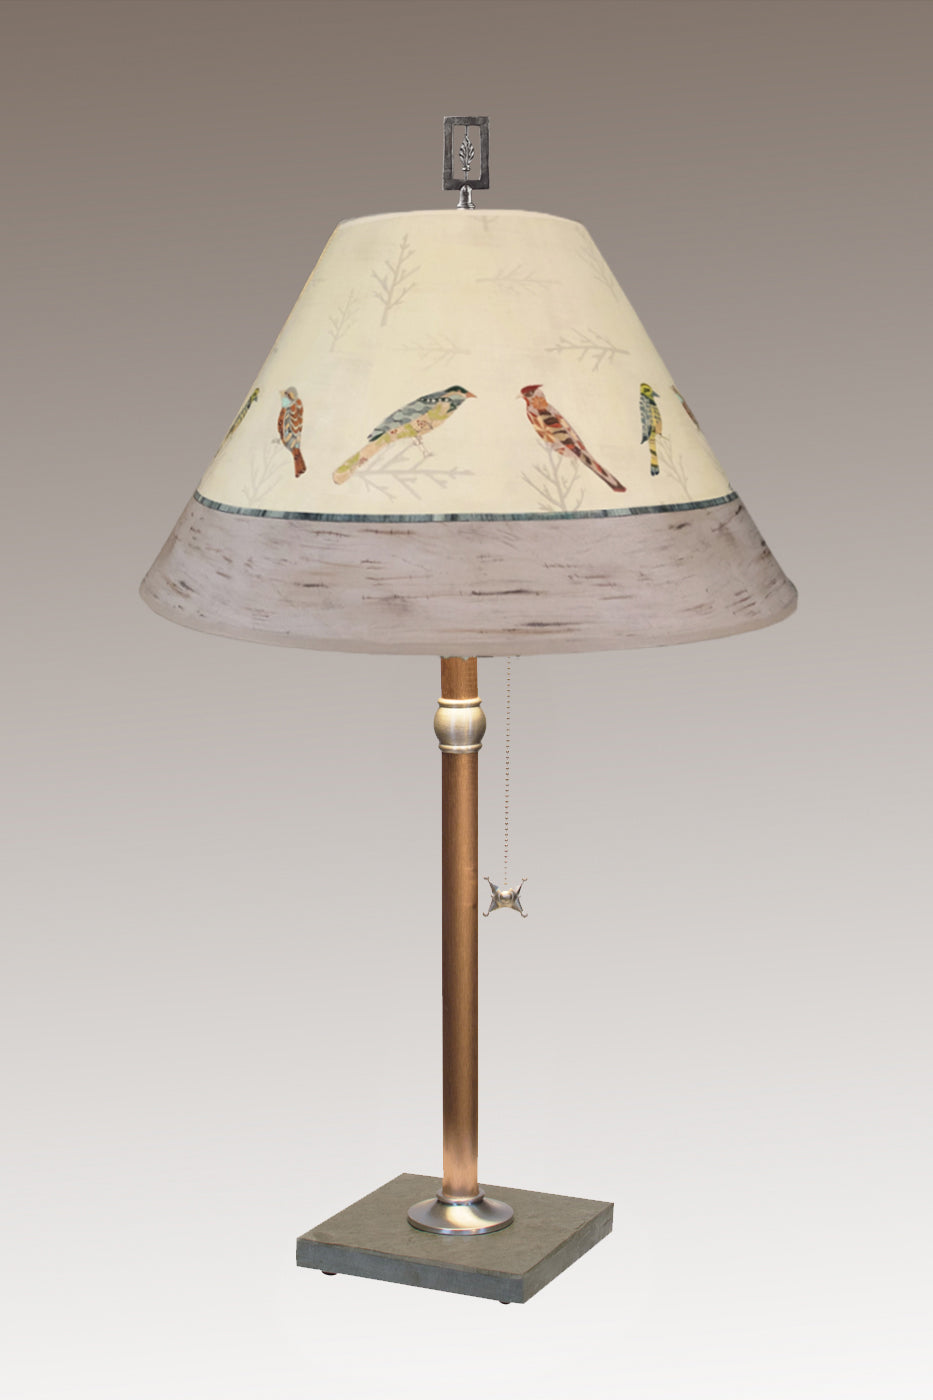 Copper Table Lamp with Medium Conical Shade in Bird Friends